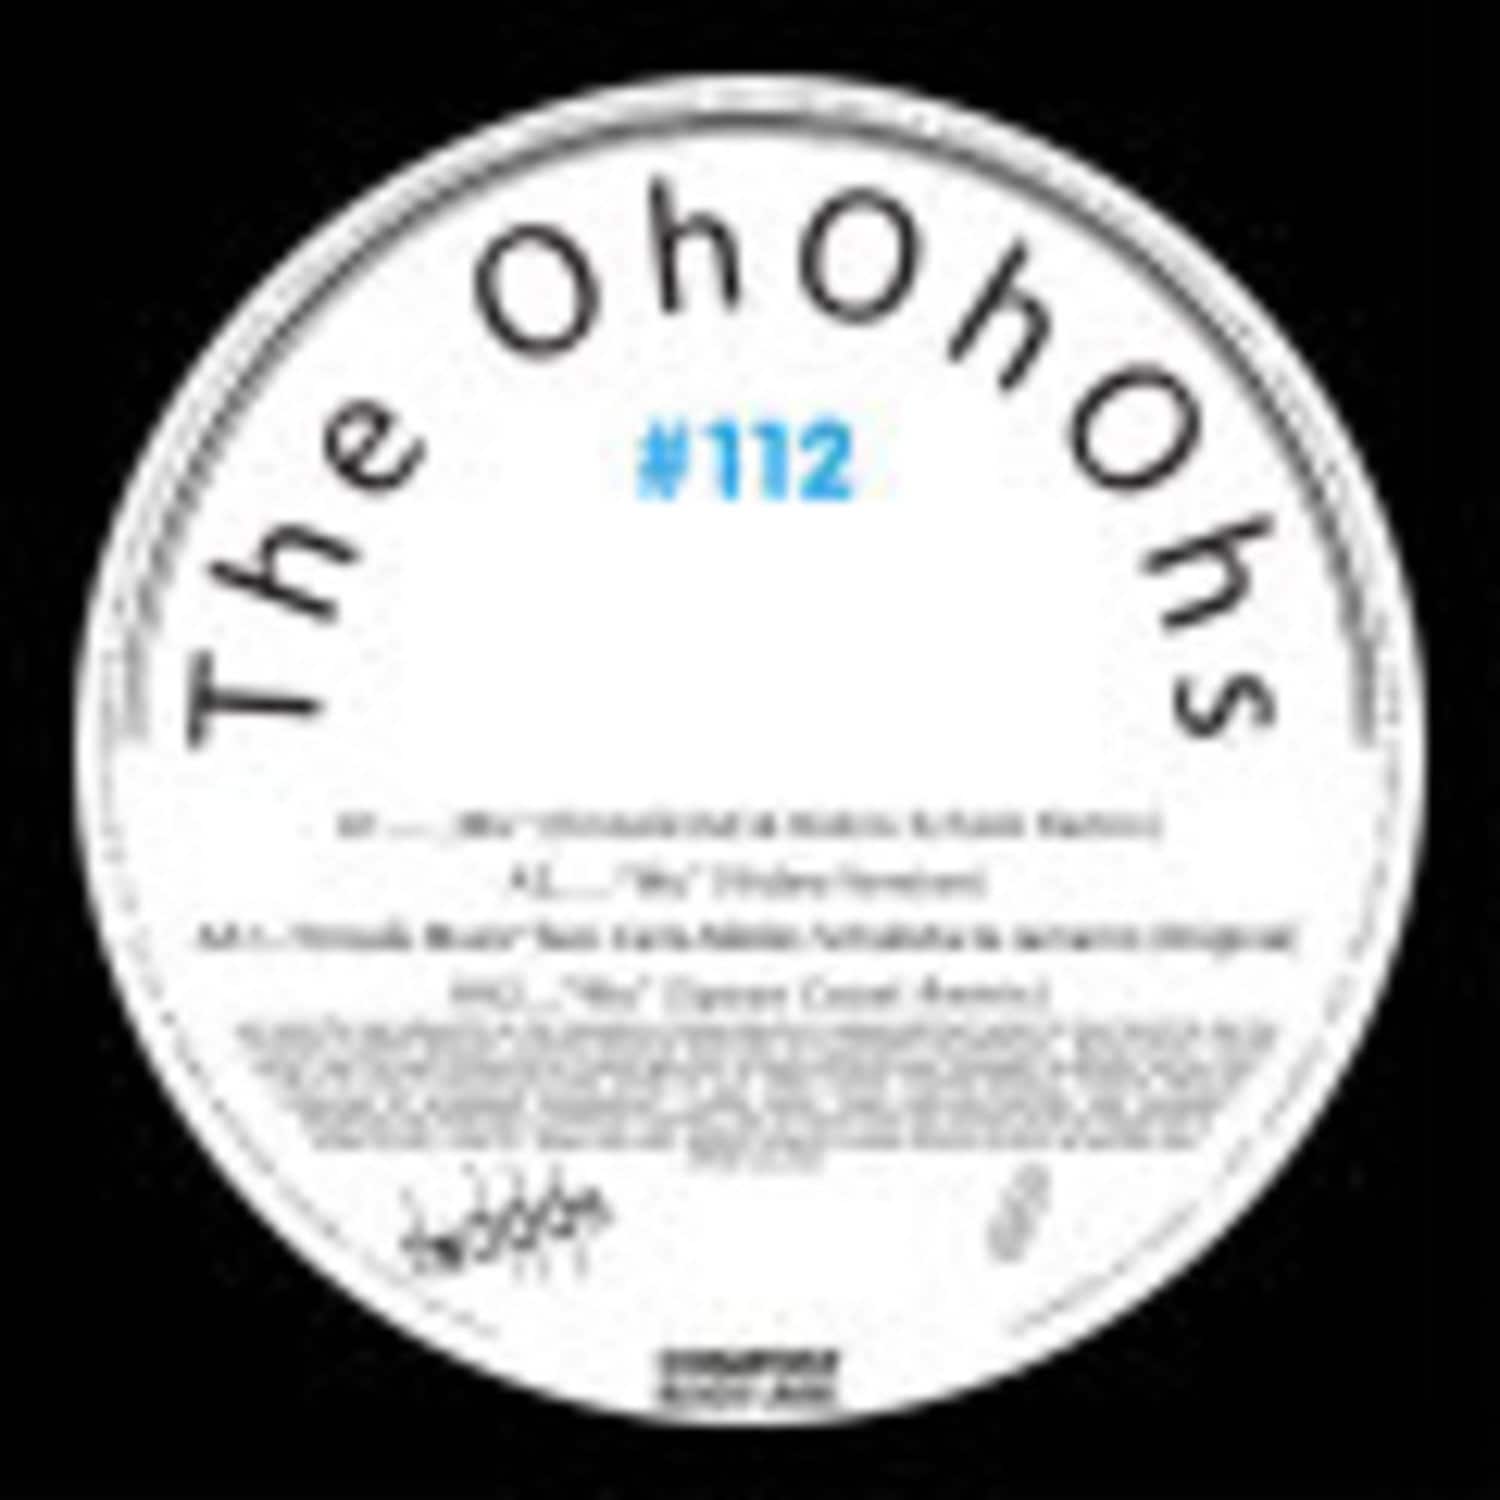 The OhOhOhs - COMPOST BLACK LABEL 112